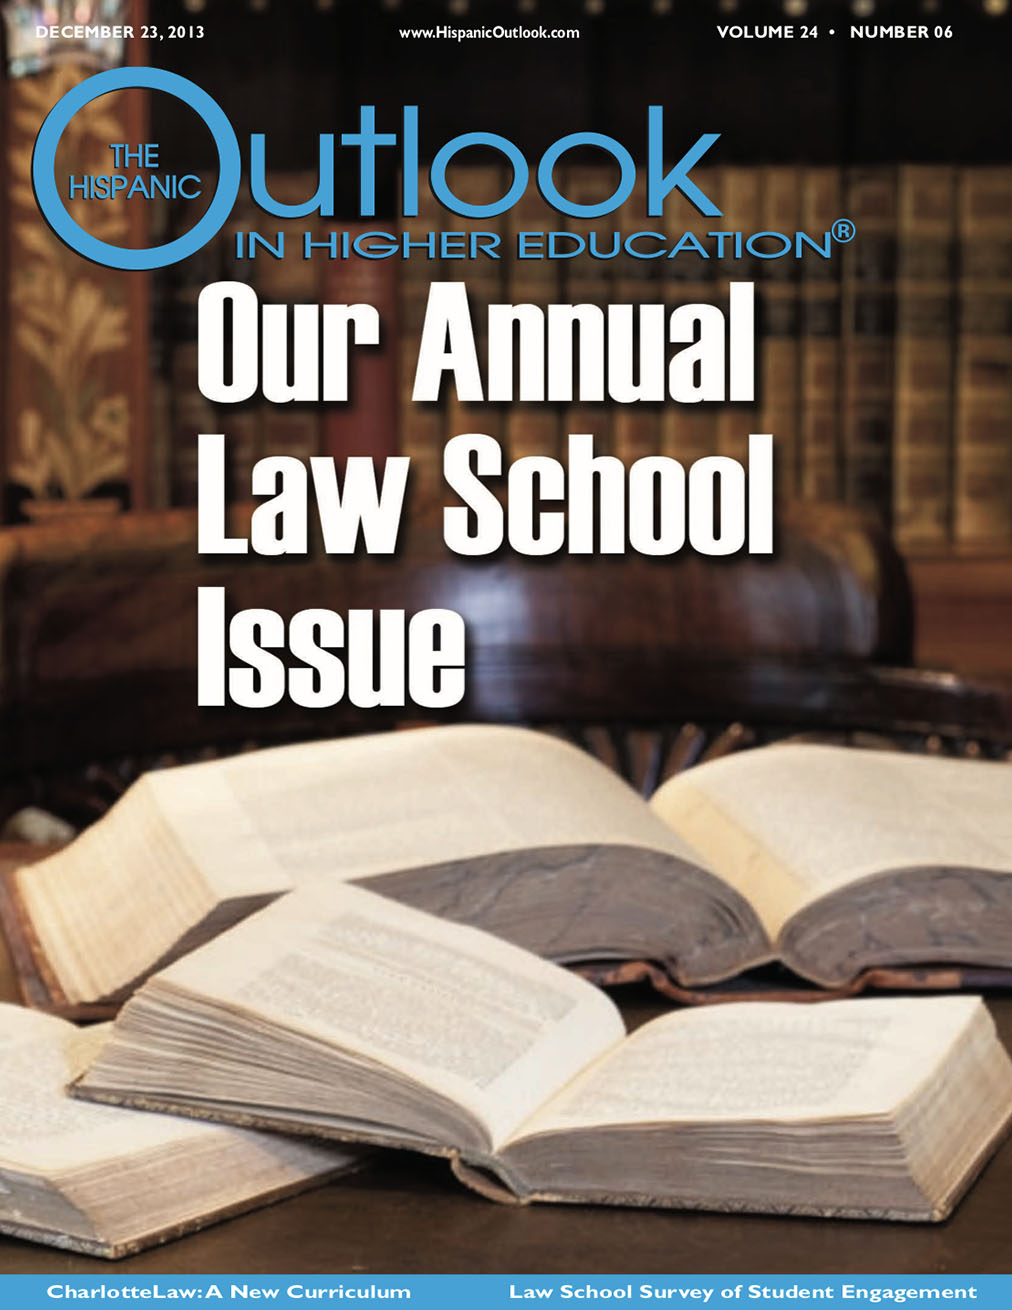 Our Annual Law School Issue